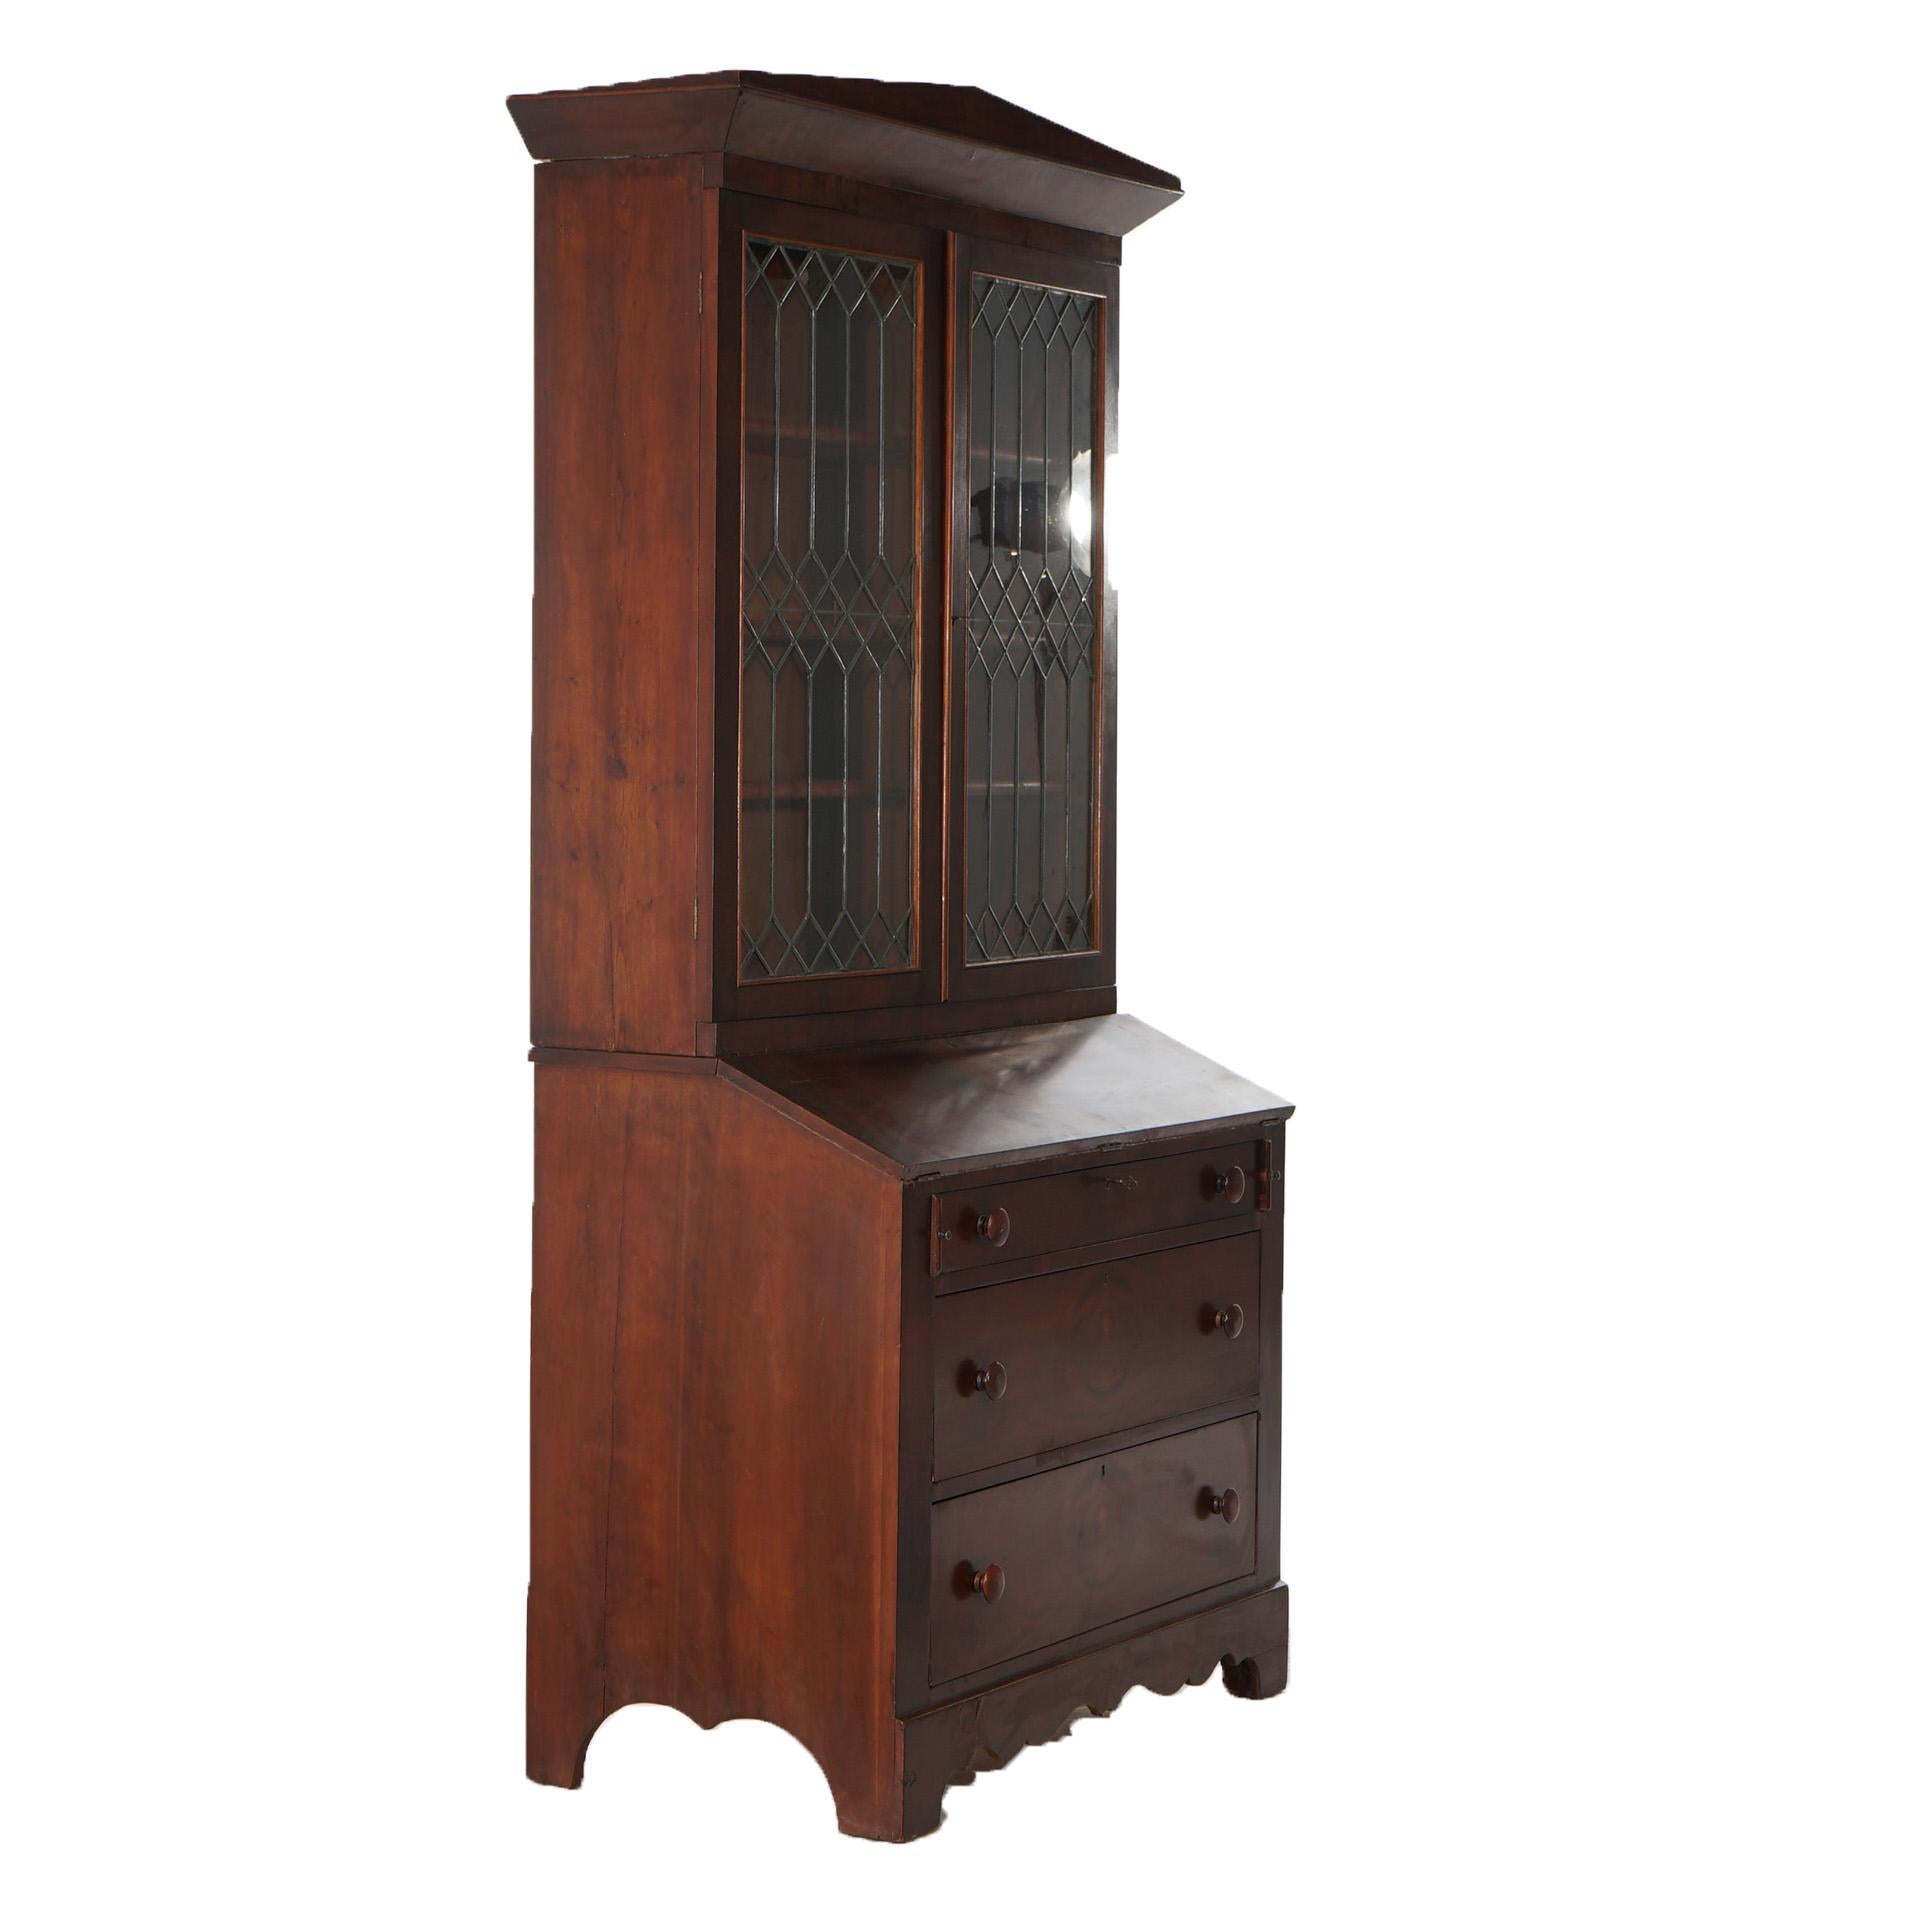 Antique American Empire Flame Mahogany Secretary Desk With Leaded Glass c1840 For Sale 12